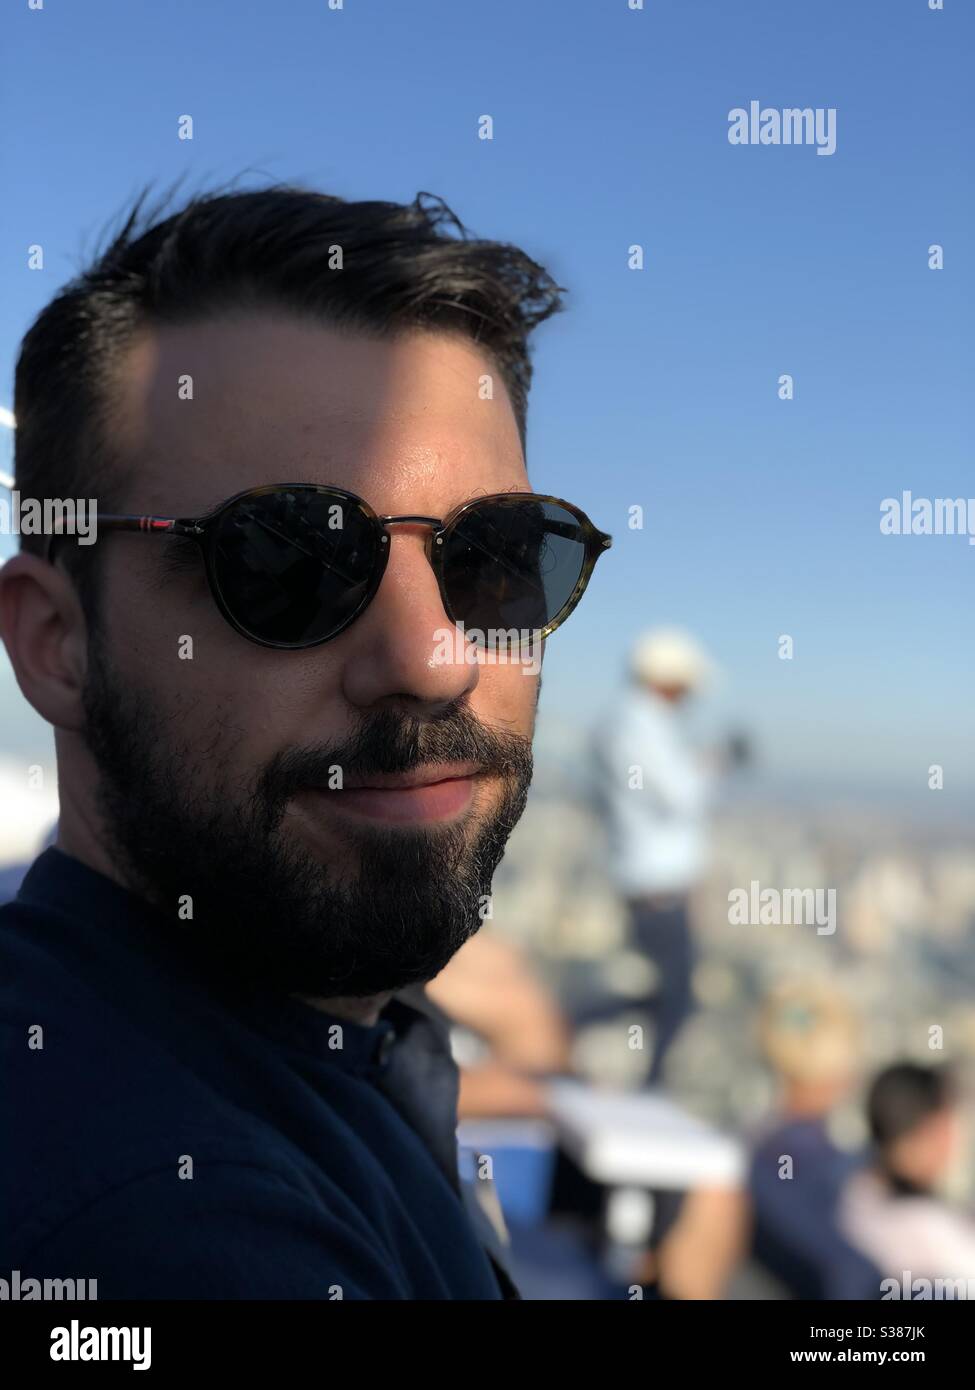 A happy man with sunglasses Stock Photo